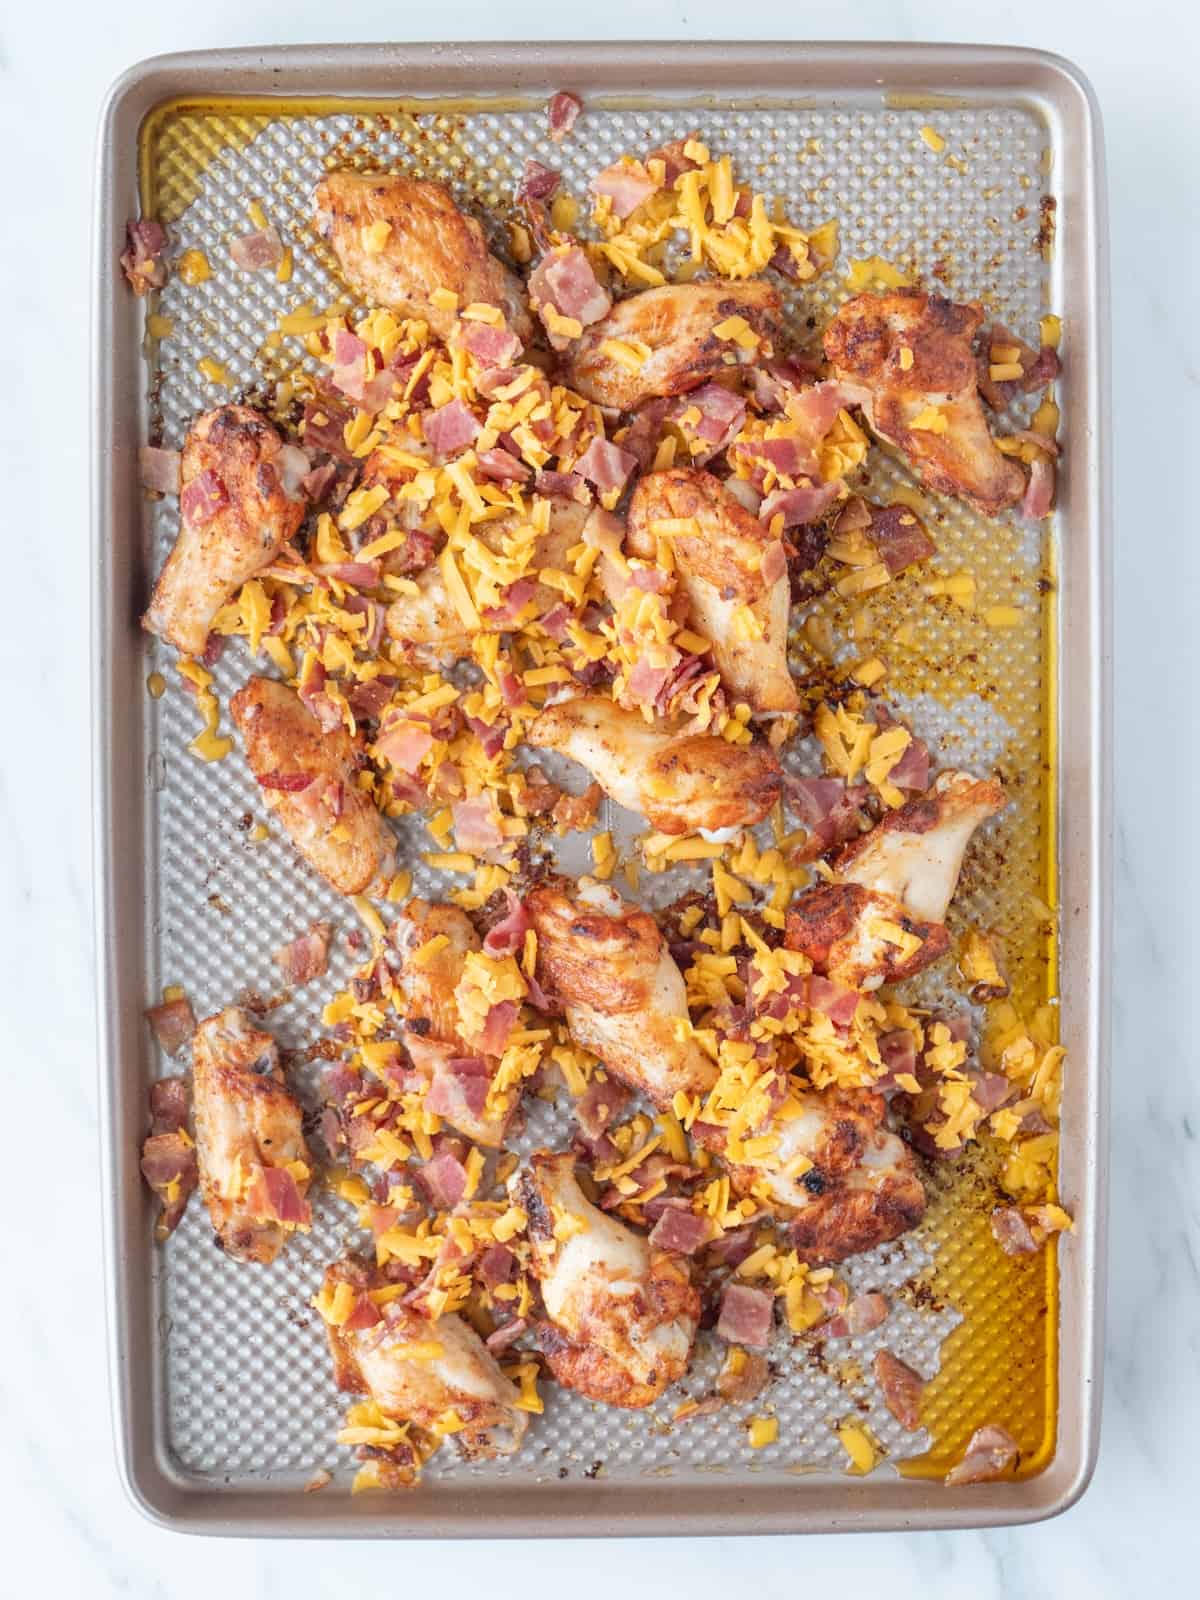 A baking sheet with chicken wings baked in the oven, topped with bacon pieces and shredded cheese.